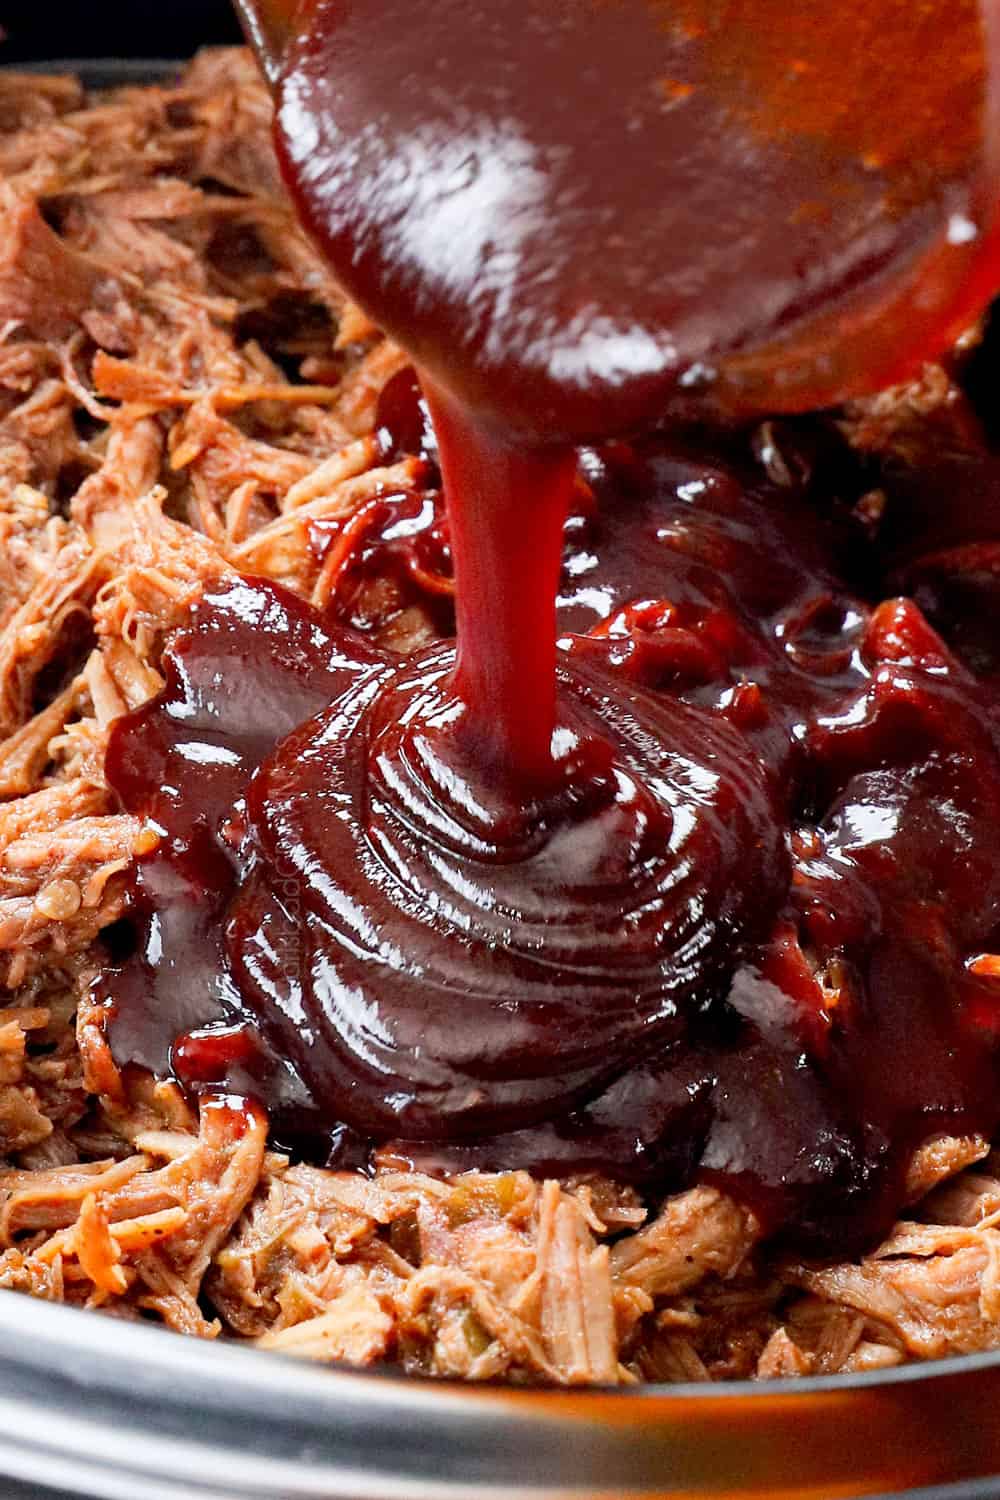 showing how to make pulled pork recipe by pouring barbecue sauce over the pulled pork and stirring to combine